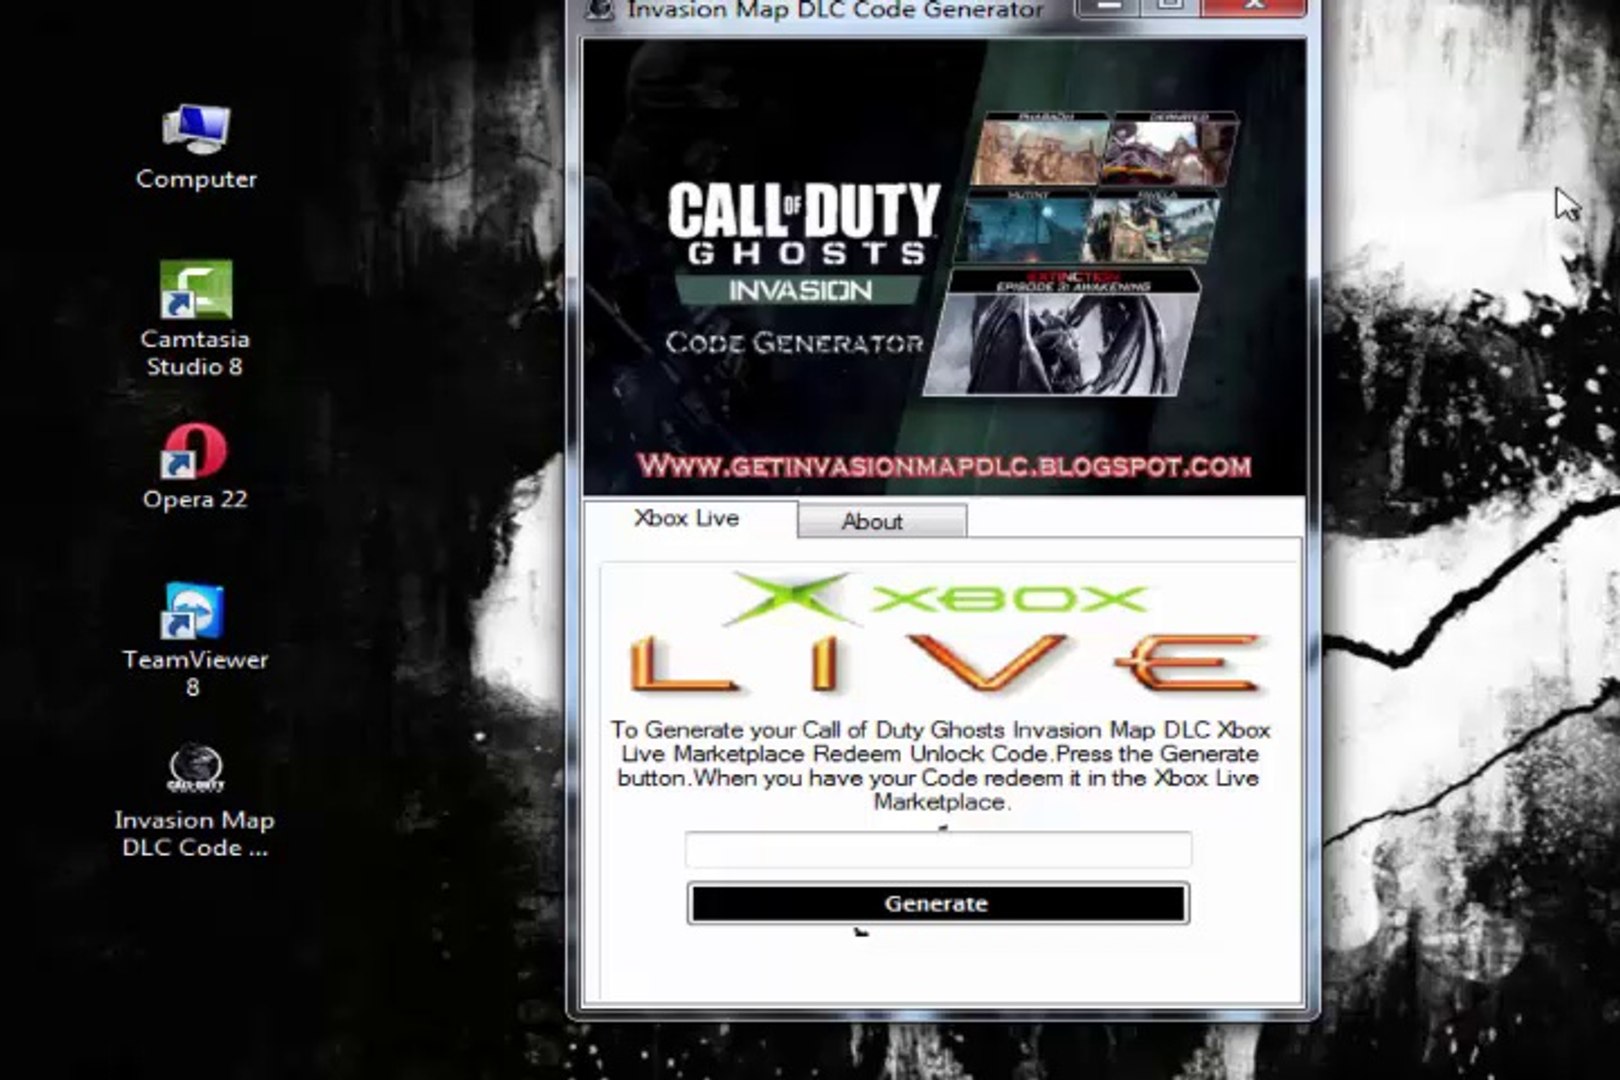 Call Of Duty: Black Ops 2 Season Pass Generator [PC,XBOX,PS3] - video  Dailymotion